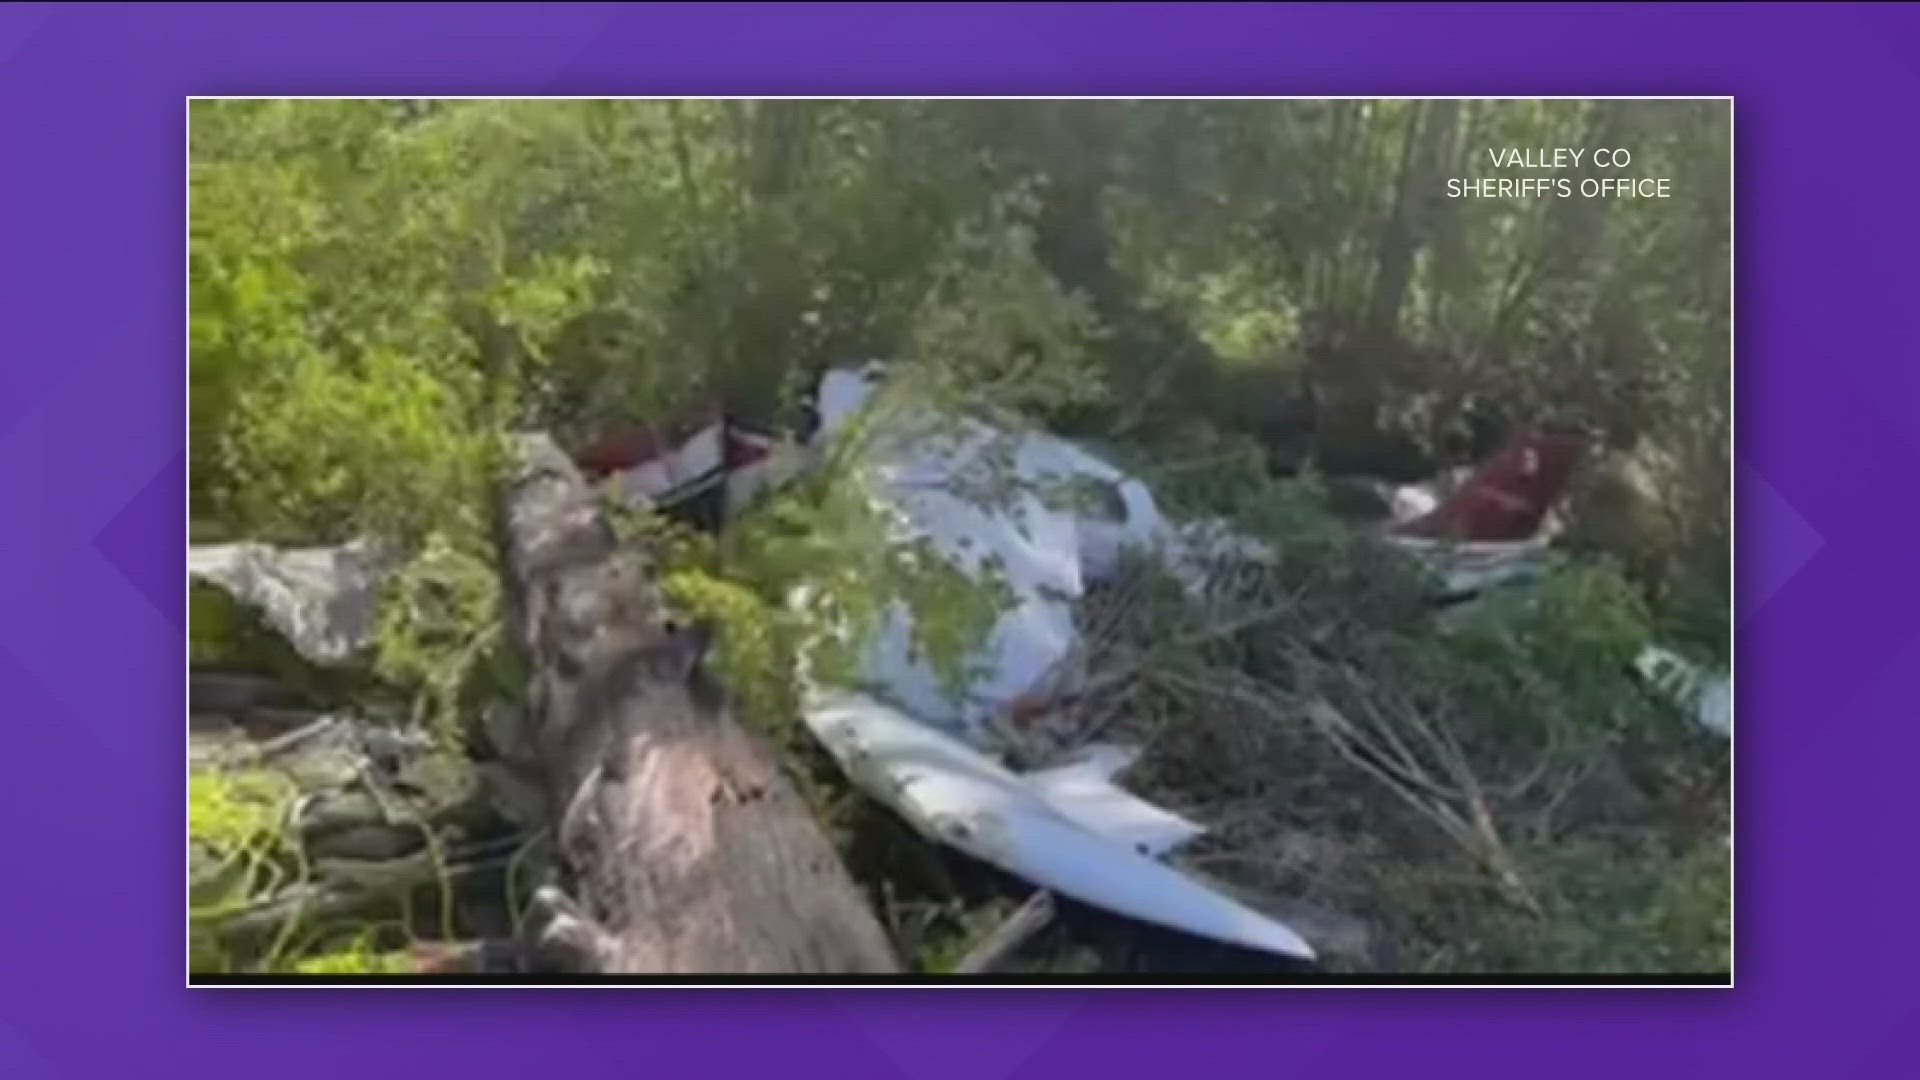 78-year-old Jonathan Van Cleave of Midland, Texas, was killed in a single-engine plane crash near Big Creek, the Valley County Sheriff's Office said.